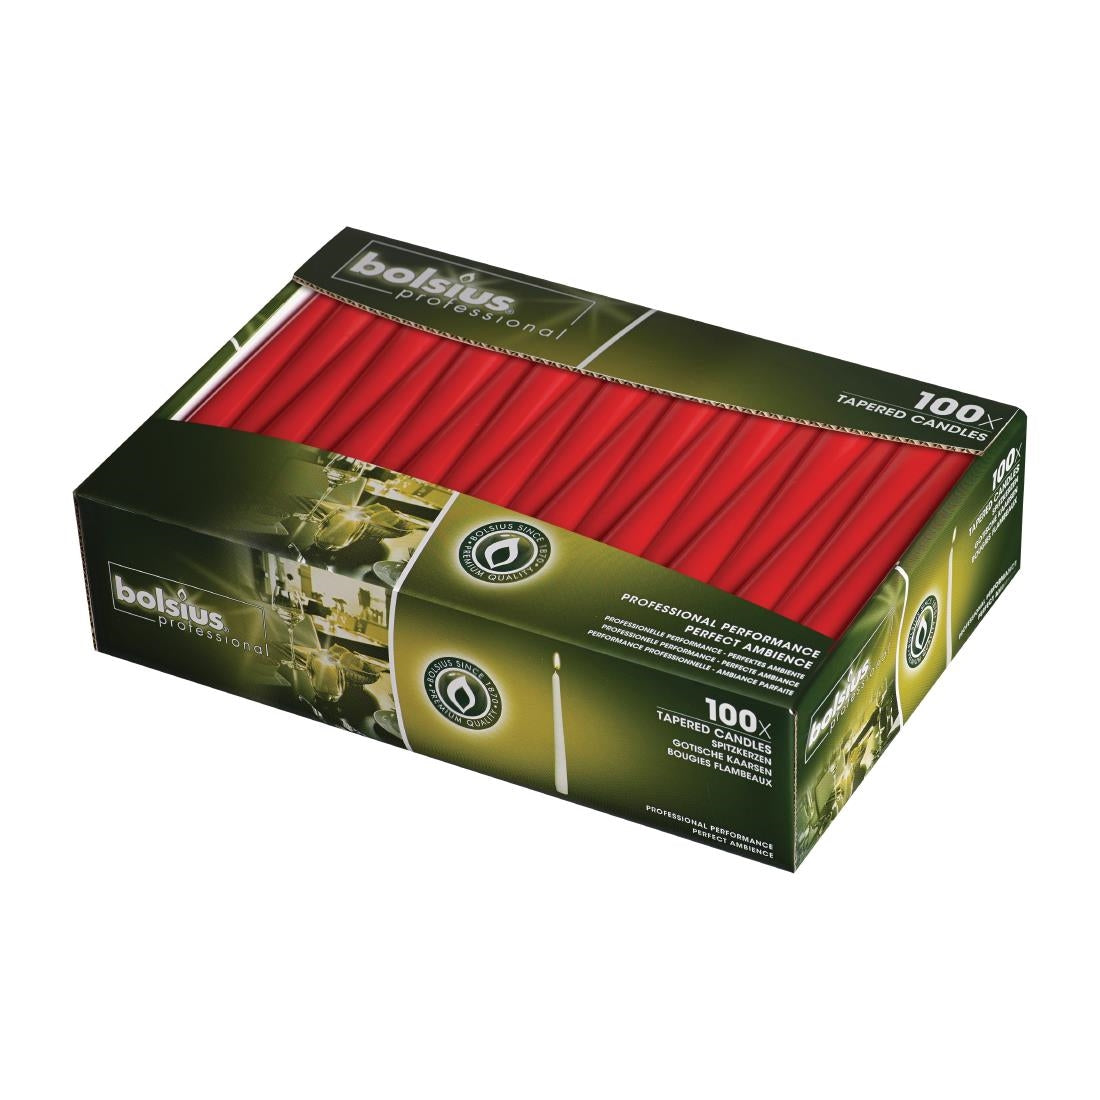 P961 Tapered Red 10inch Candles (Pack of 100)